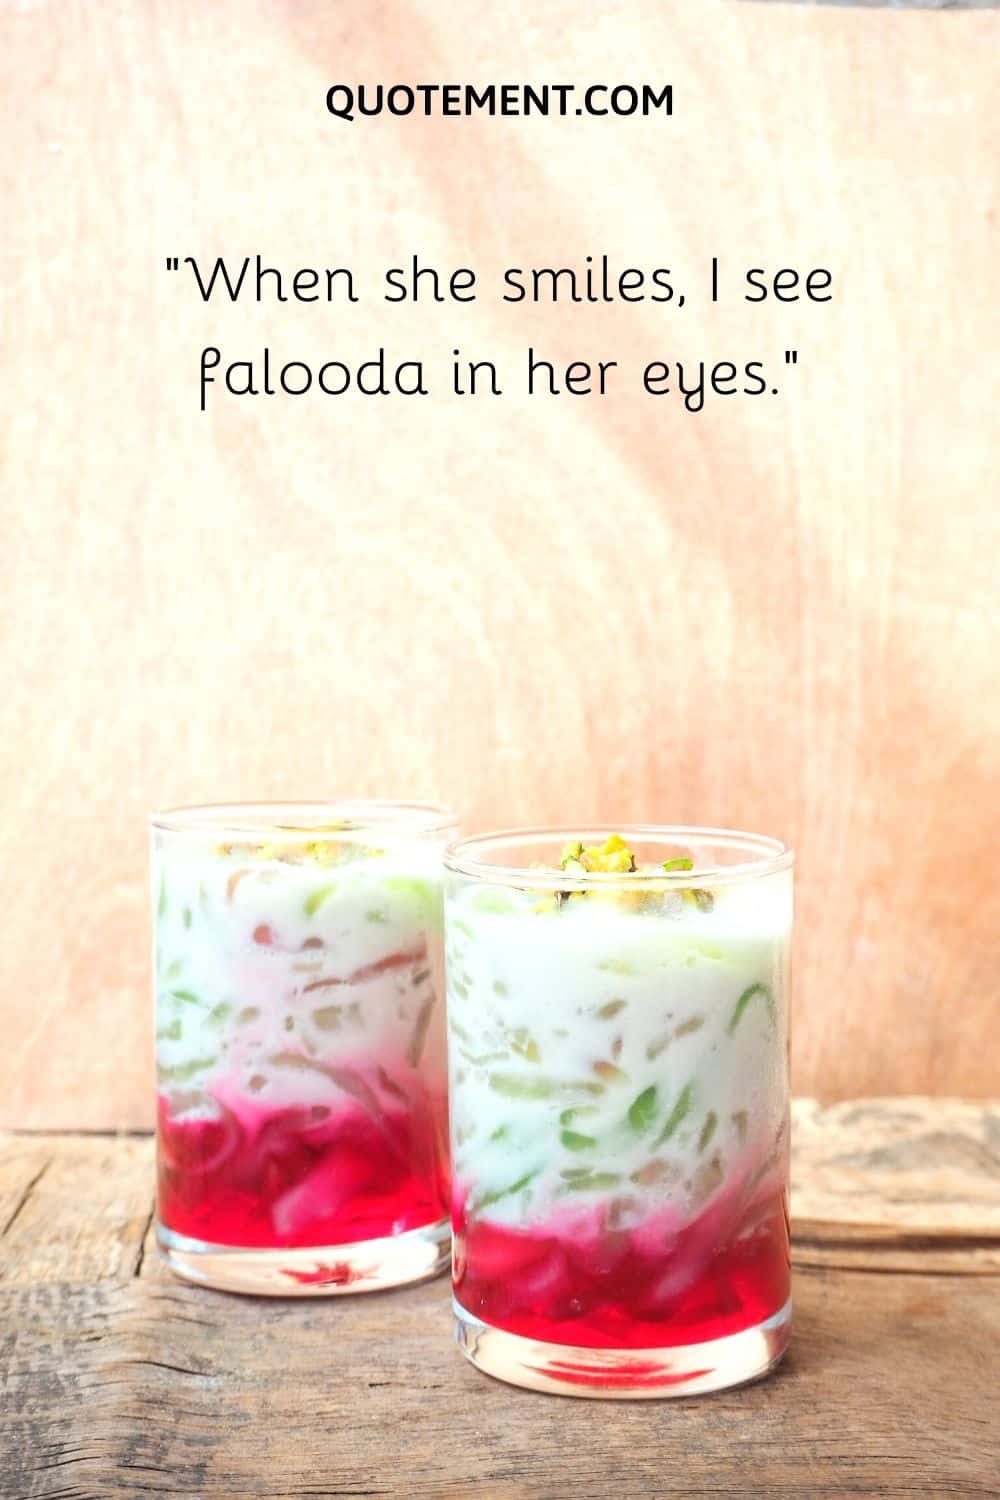 When she smiles, I see falooda in her eyes